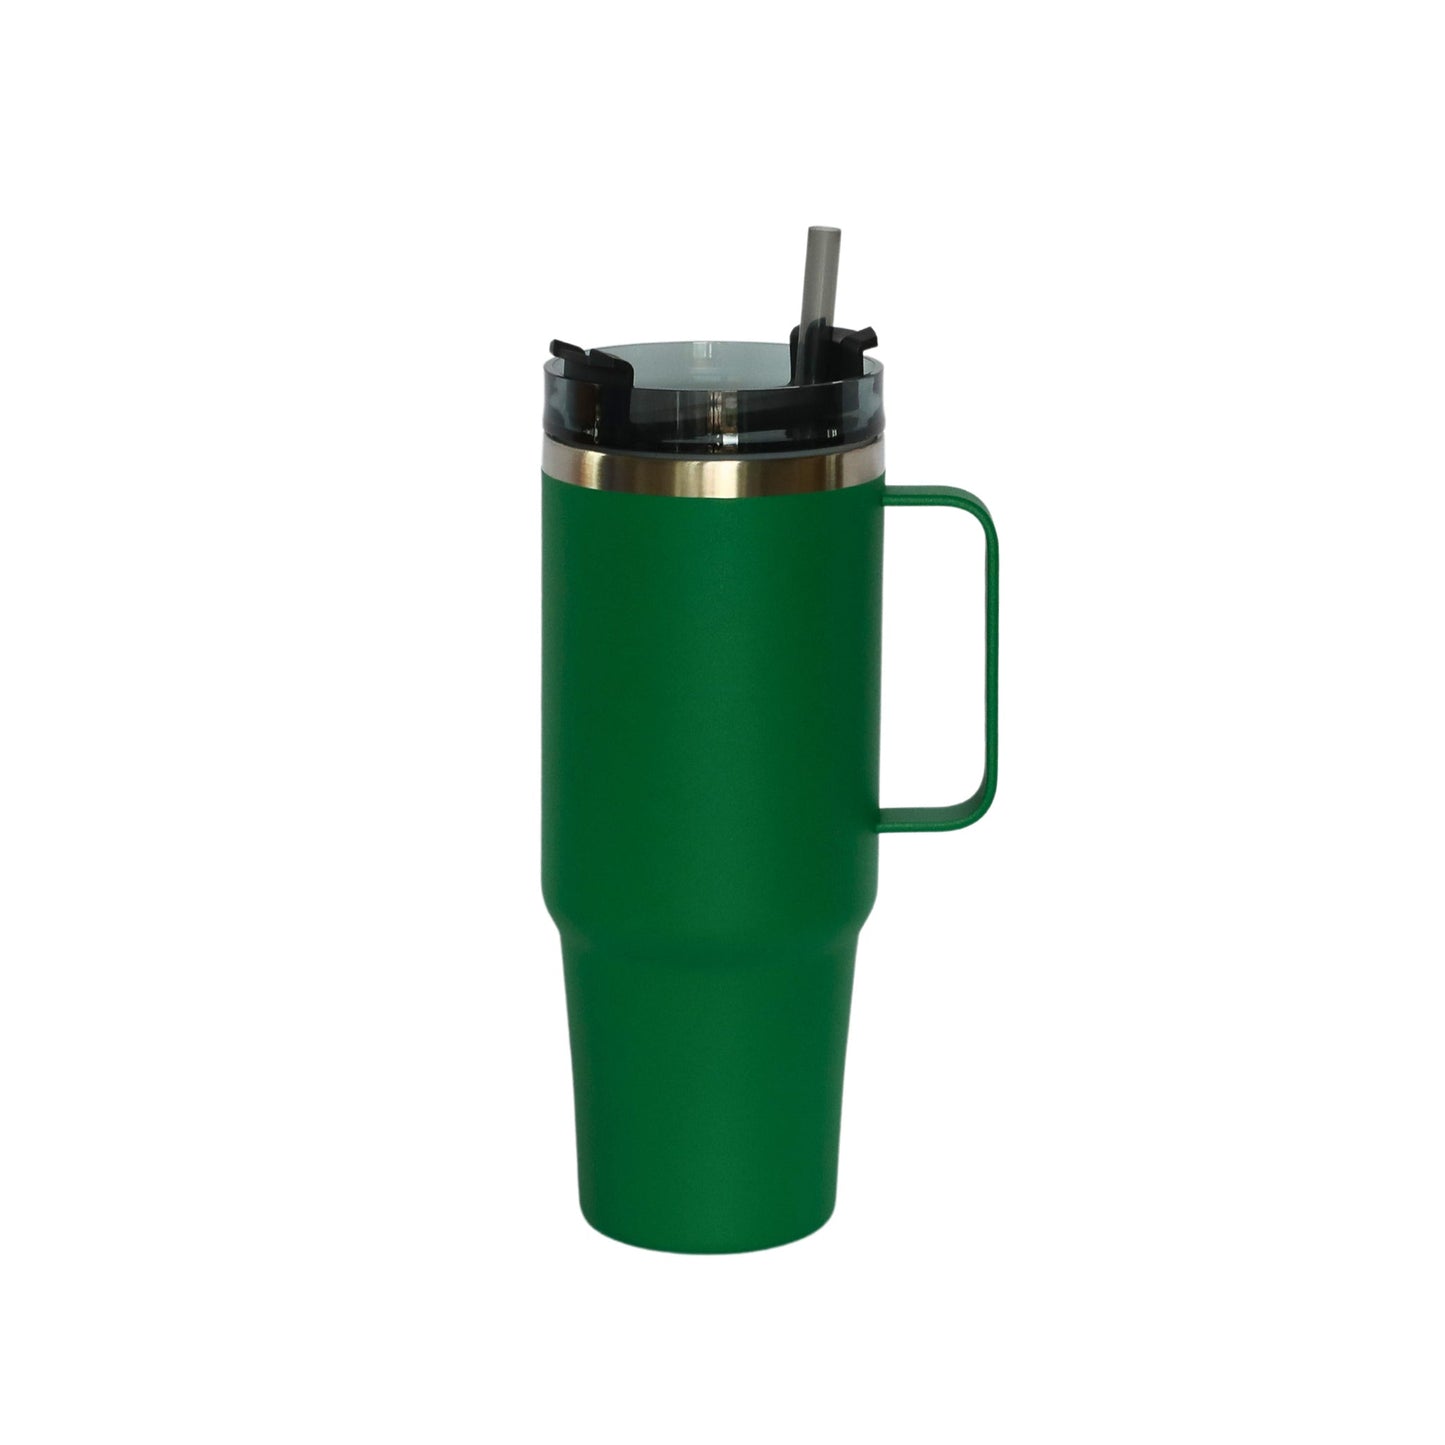 30 Oz Stainless Steel Tumbler with Handle & Straw - Green by Creative Gifts